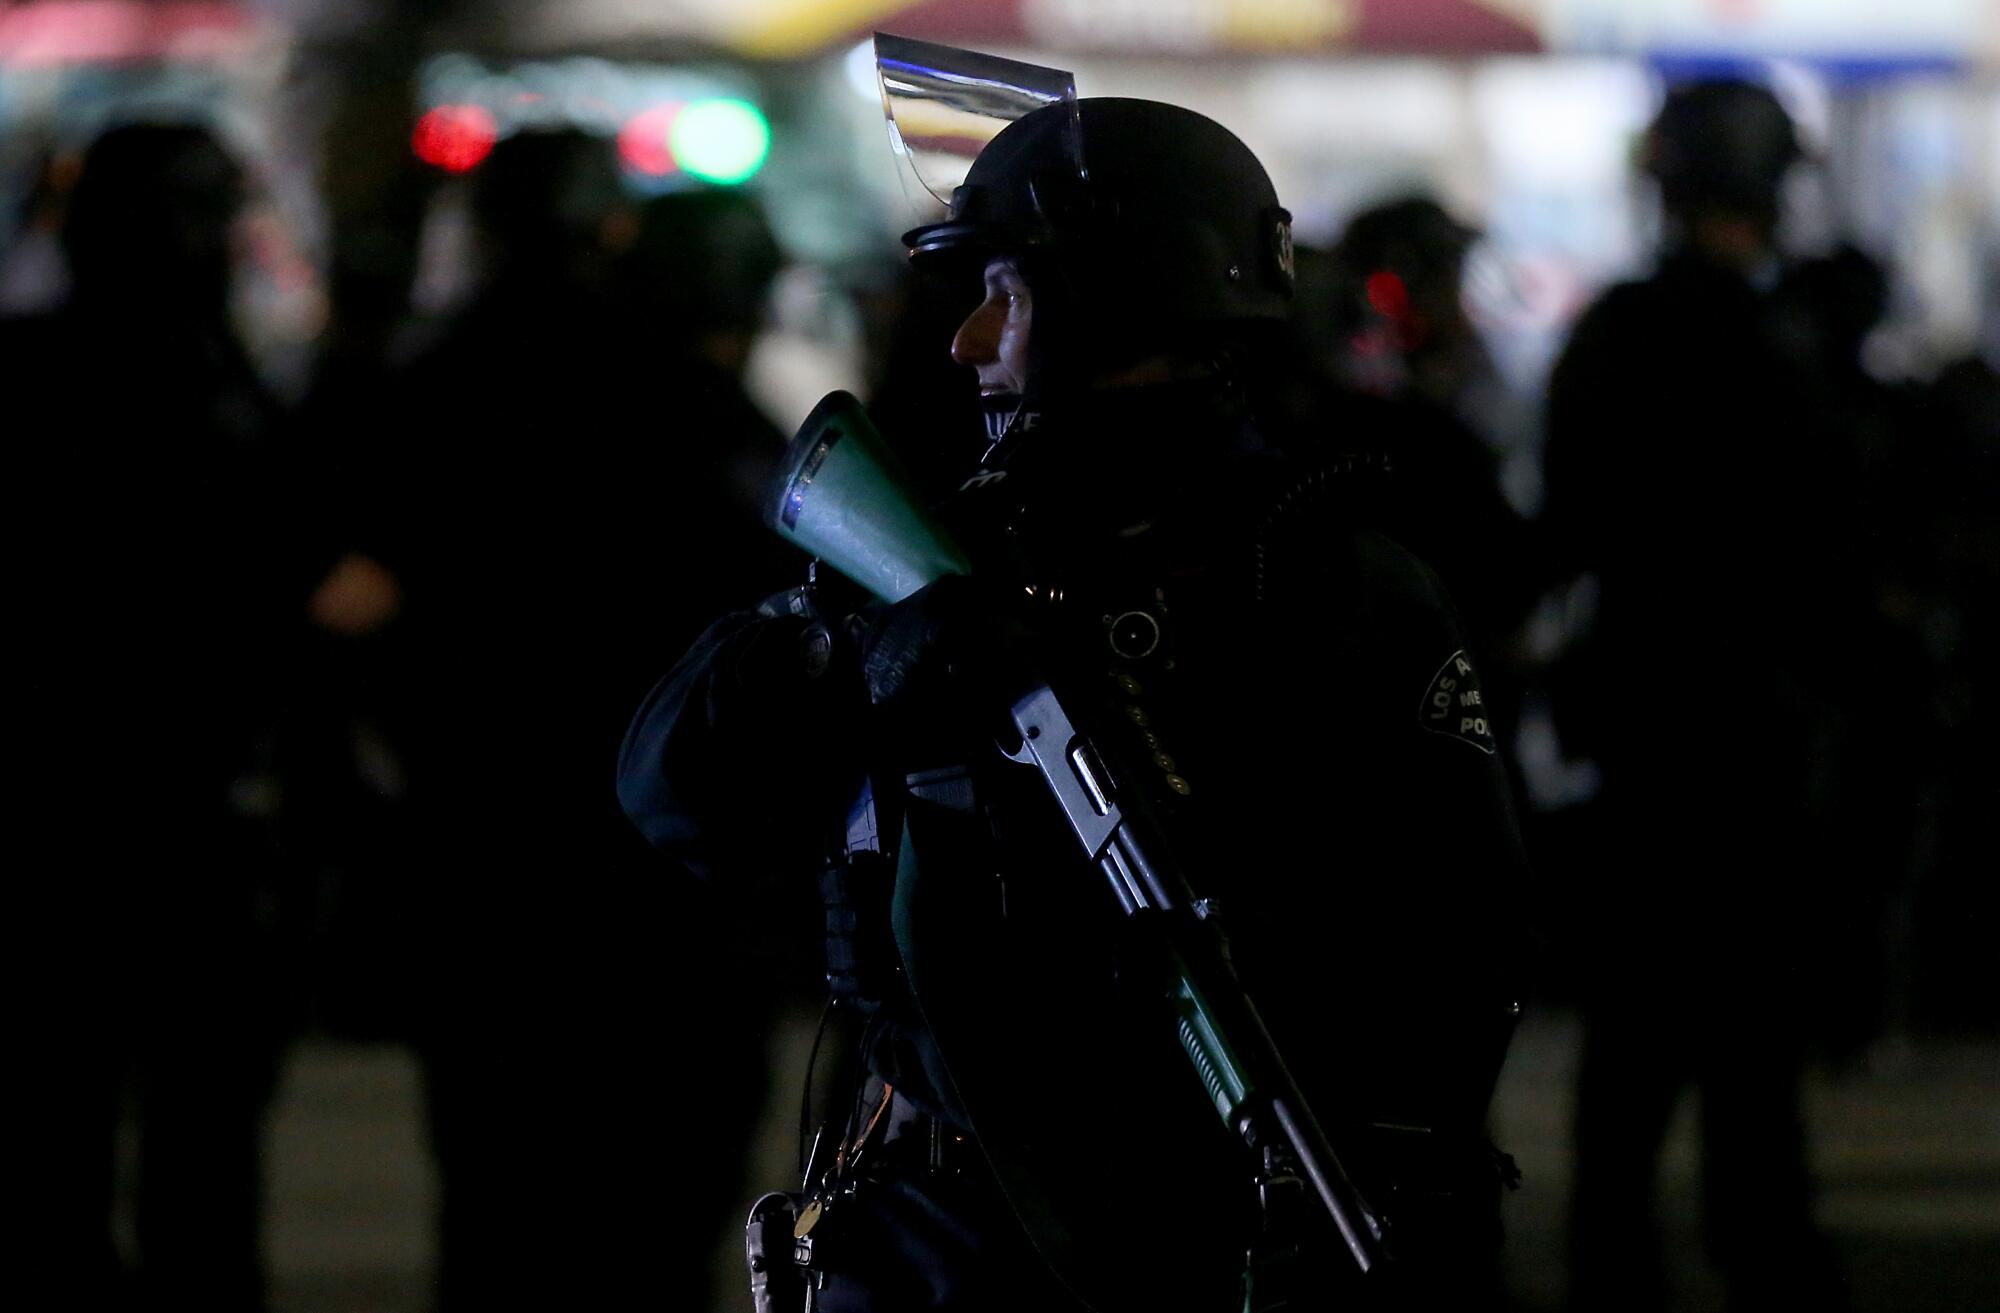 Police clear the intersection of Washington Boulevard and Figueroa Street in downtown Los Angeles on Tuesday night